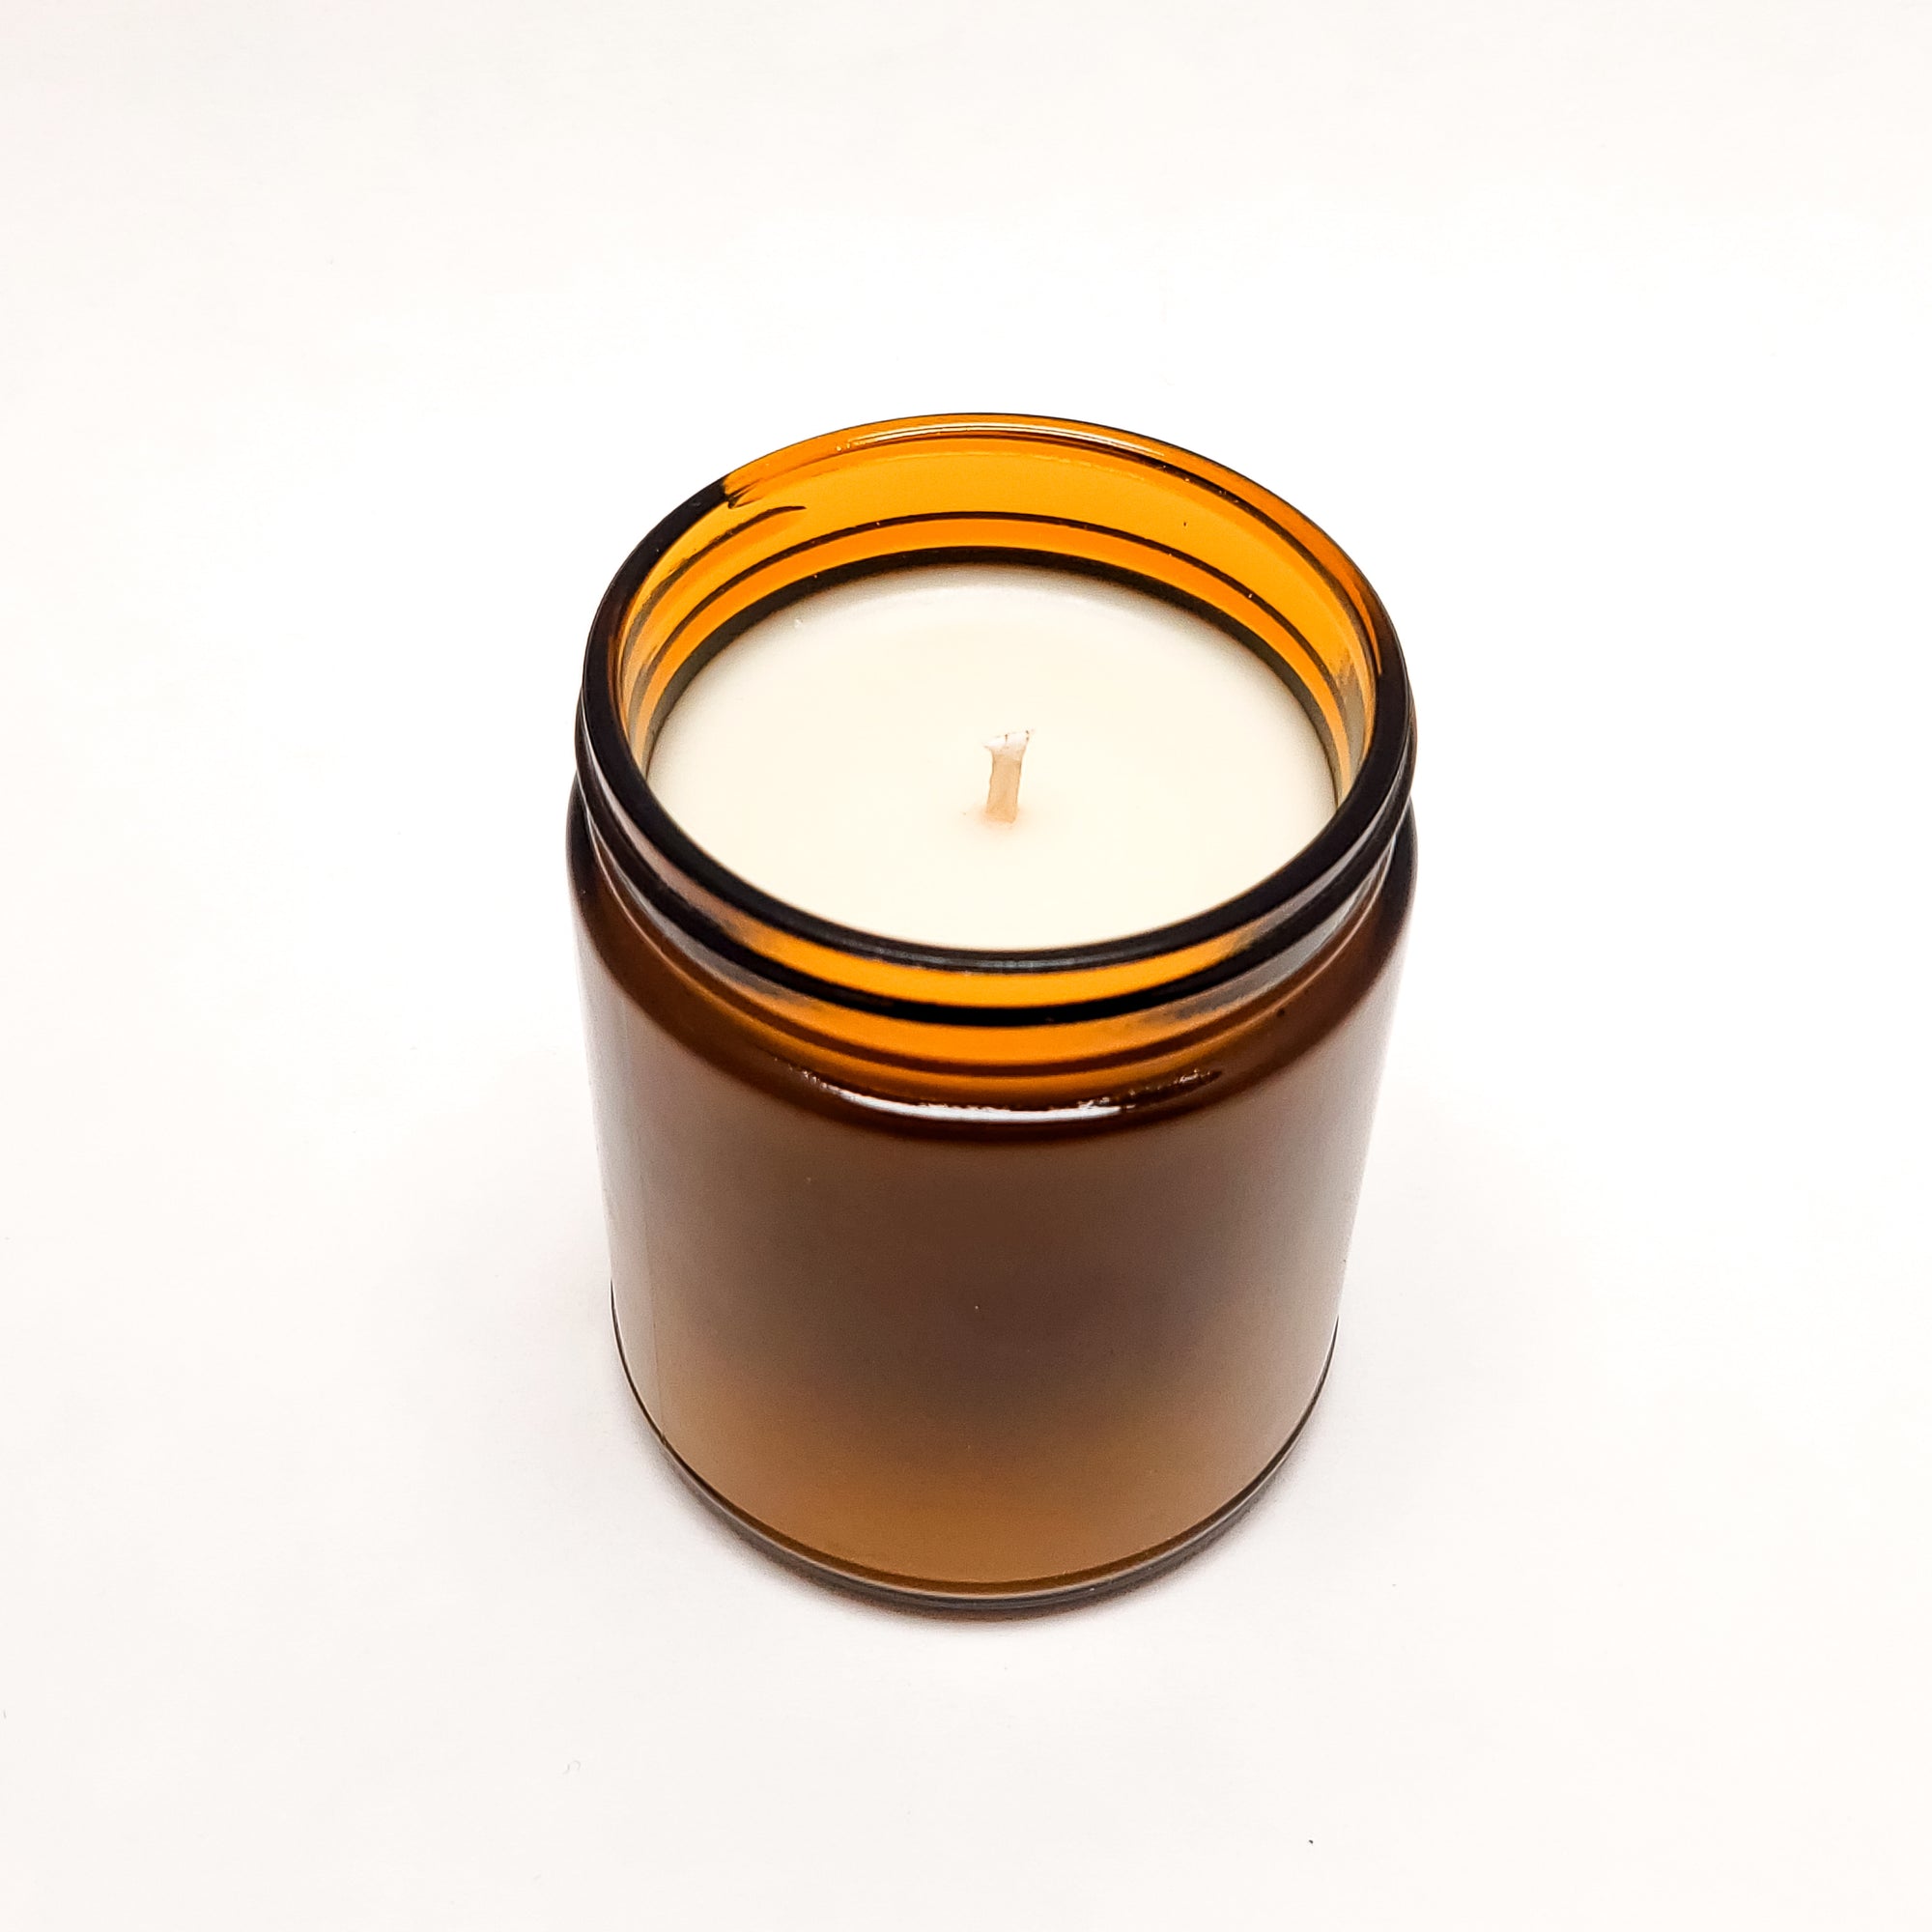 Cranberry & Apple Coconut-Soy Wax Candle – MADE Art Boutique